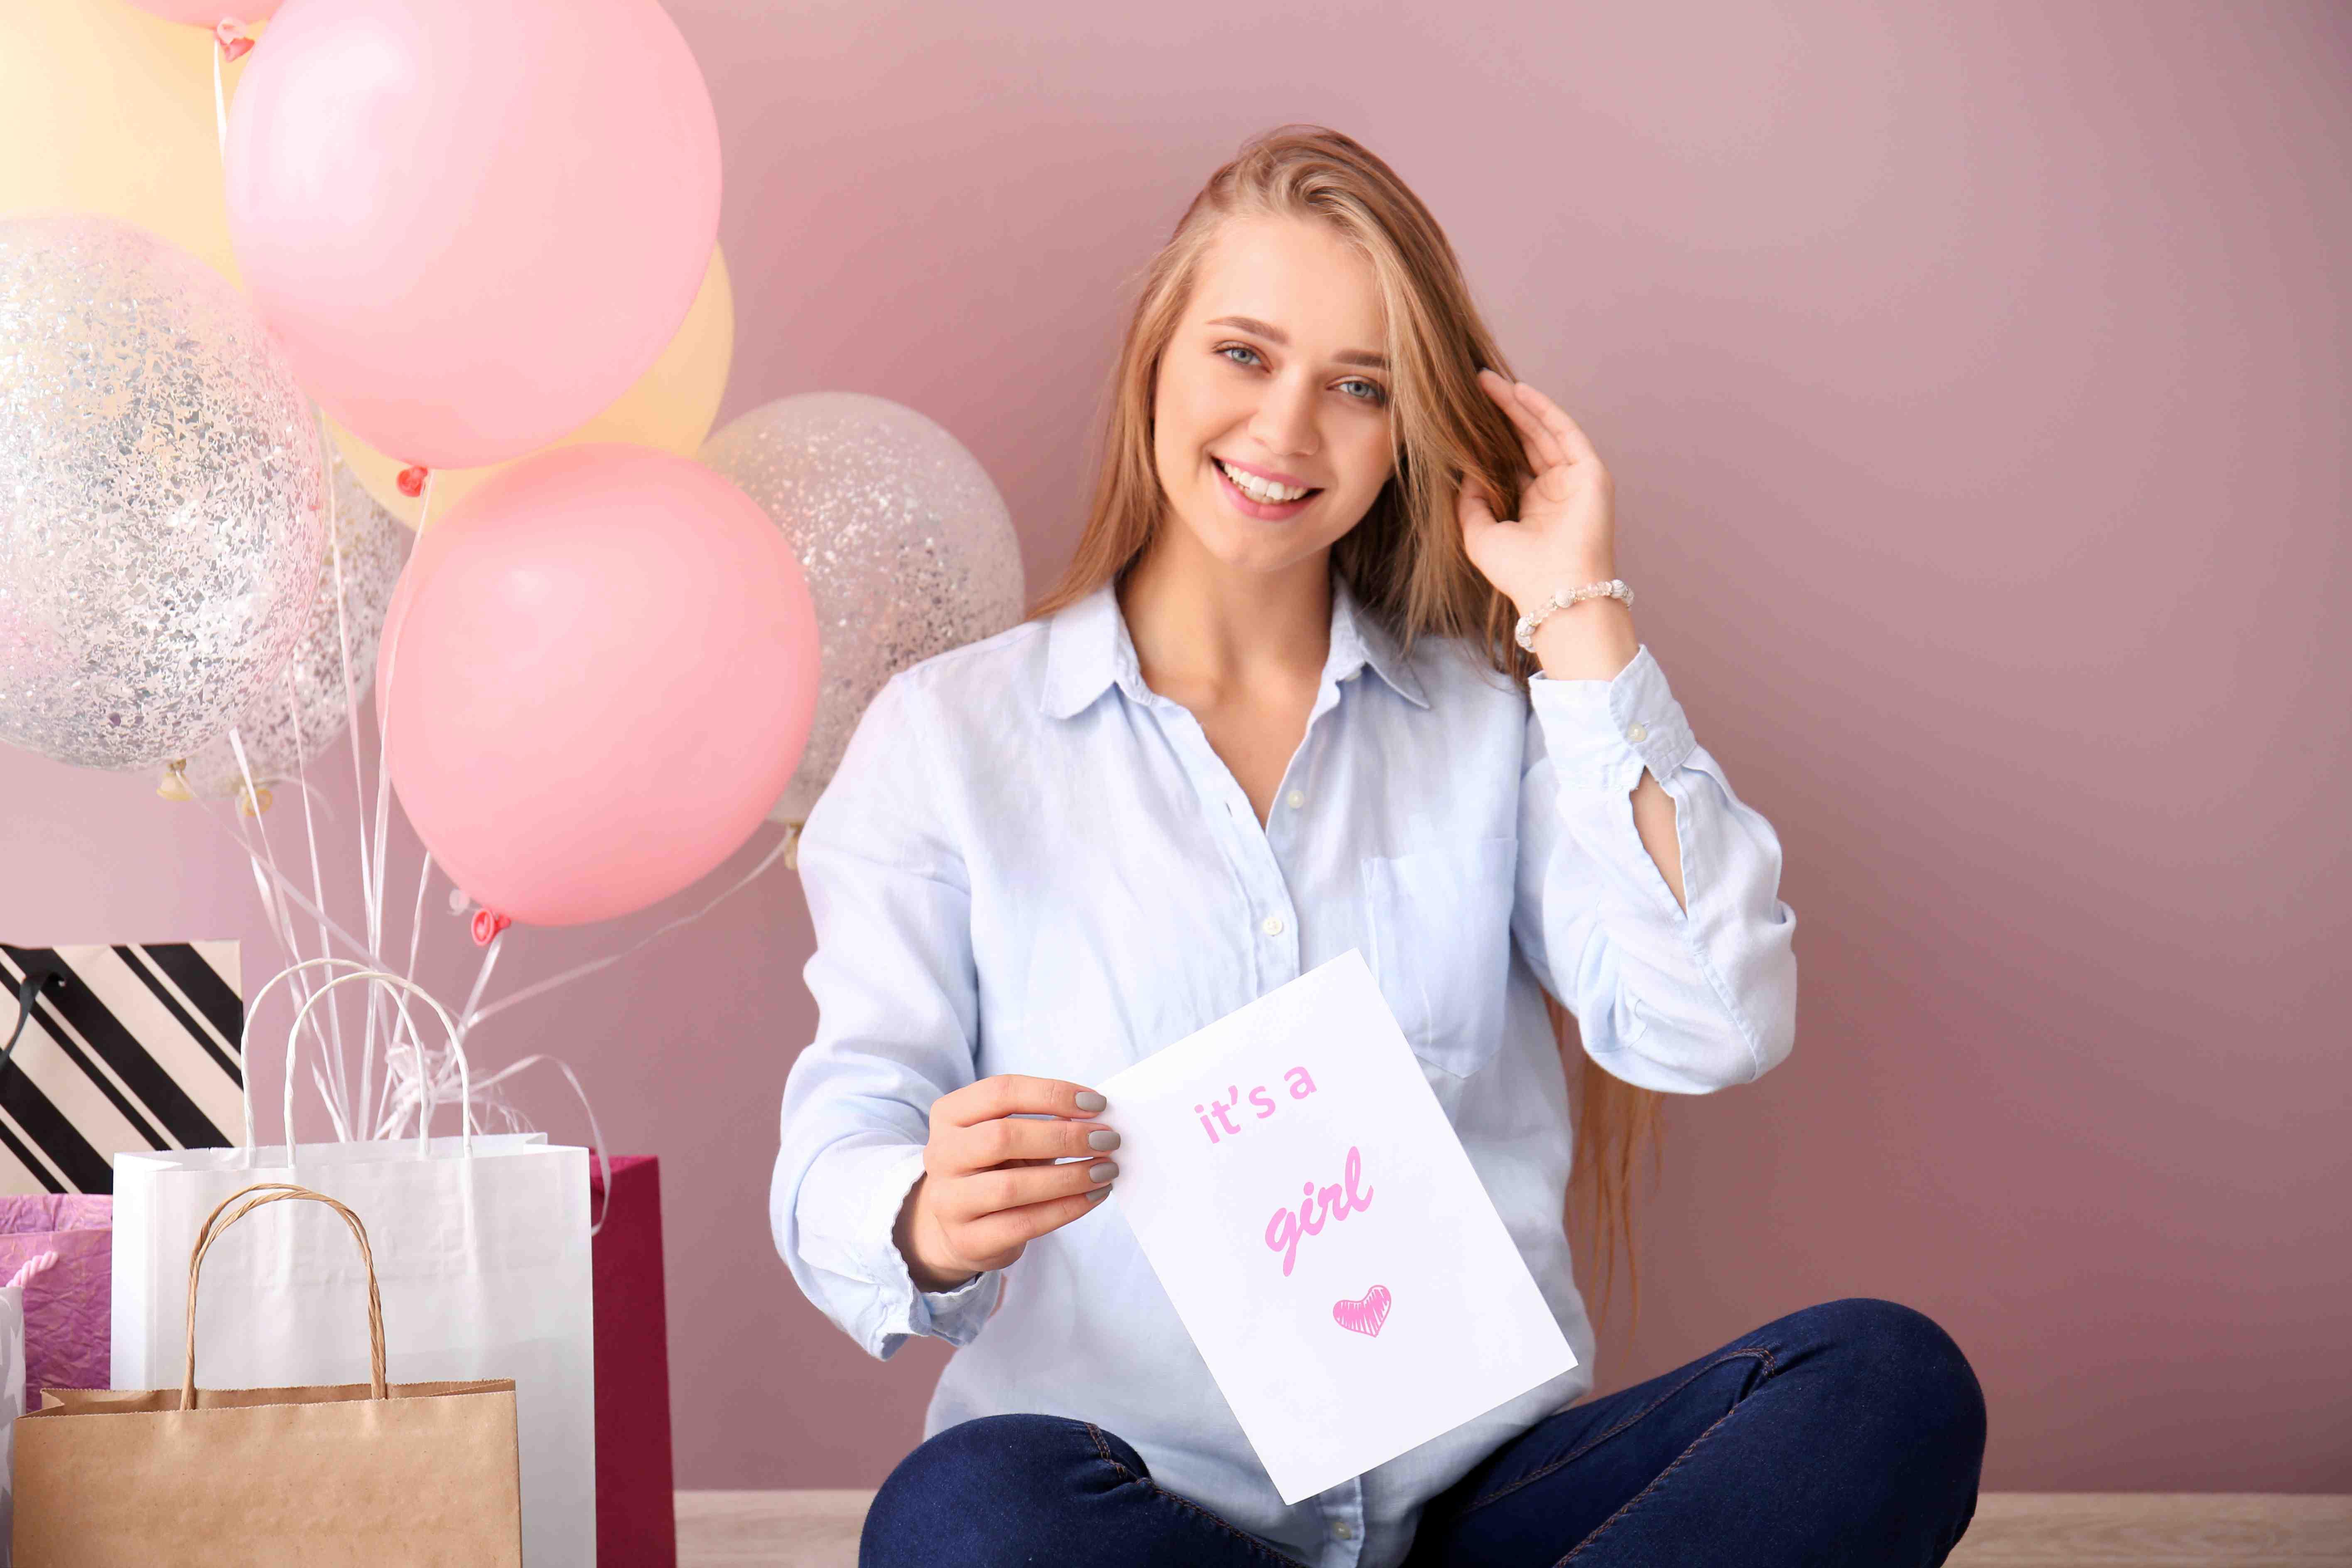 Read our post: Gender Reveal Gift Ideas - What Makes a Good Gift for a Baby Reveal